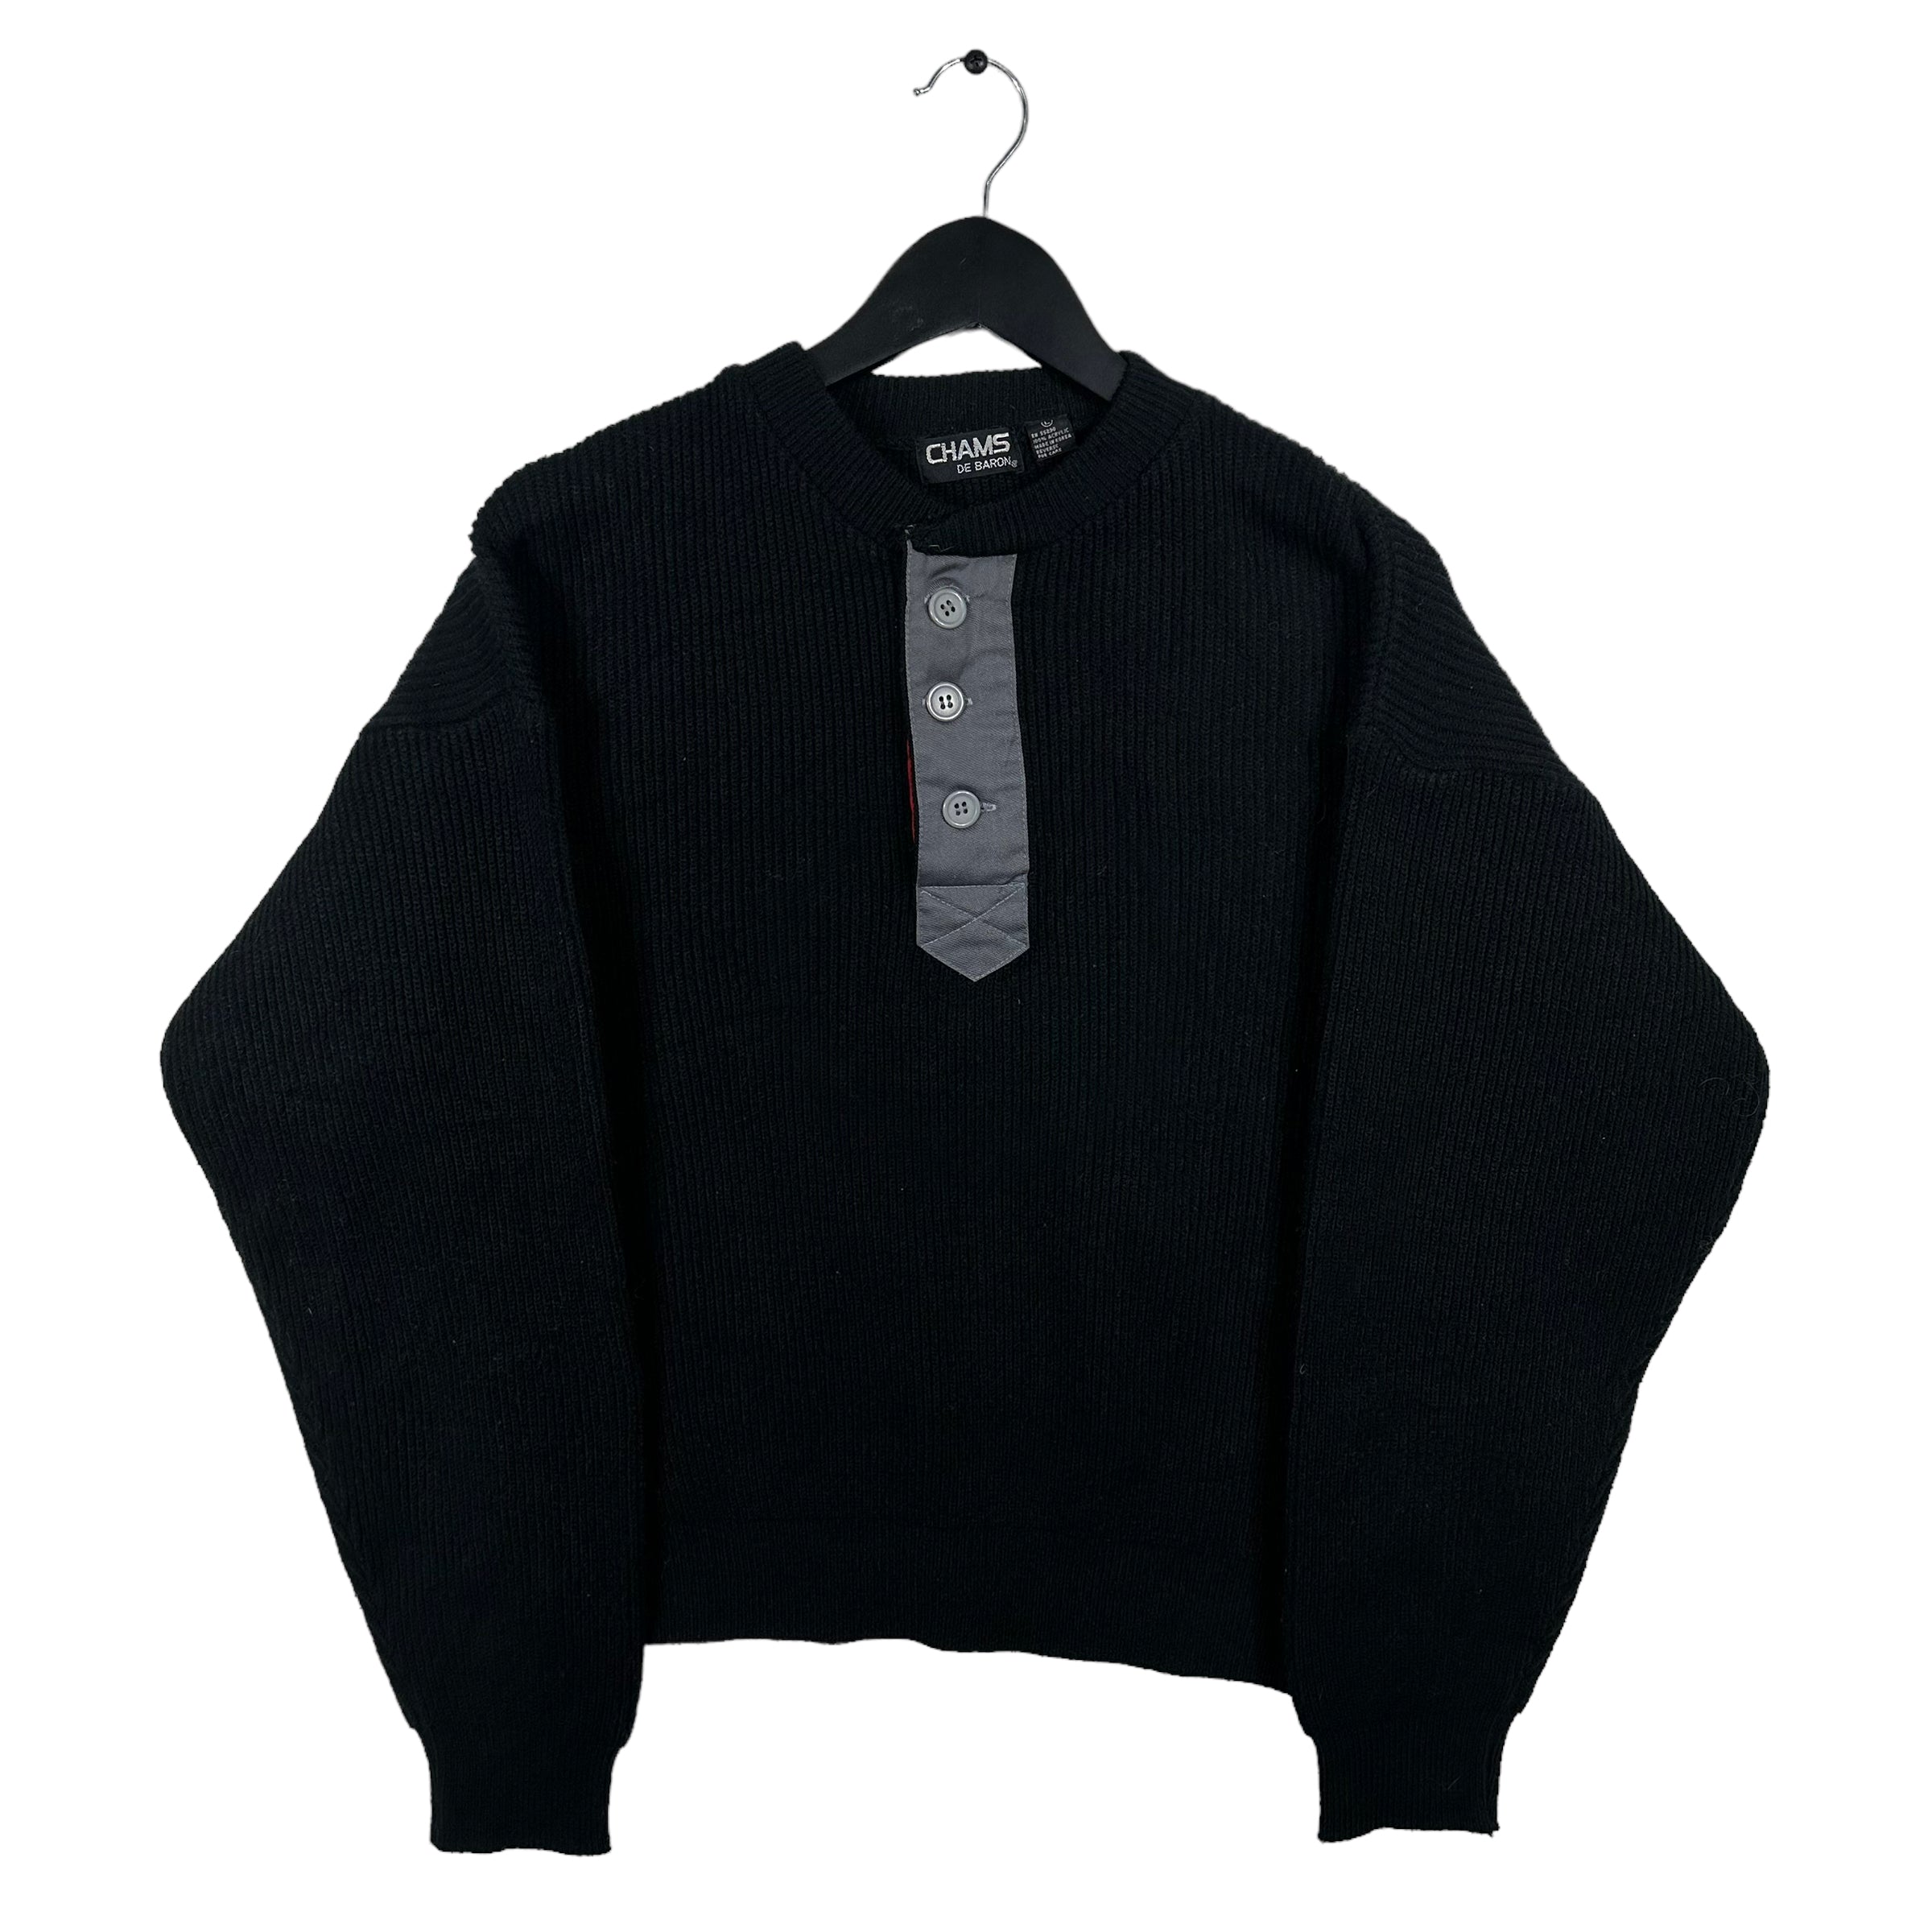 Vintage Chams 1/4 Button Knit Sweater